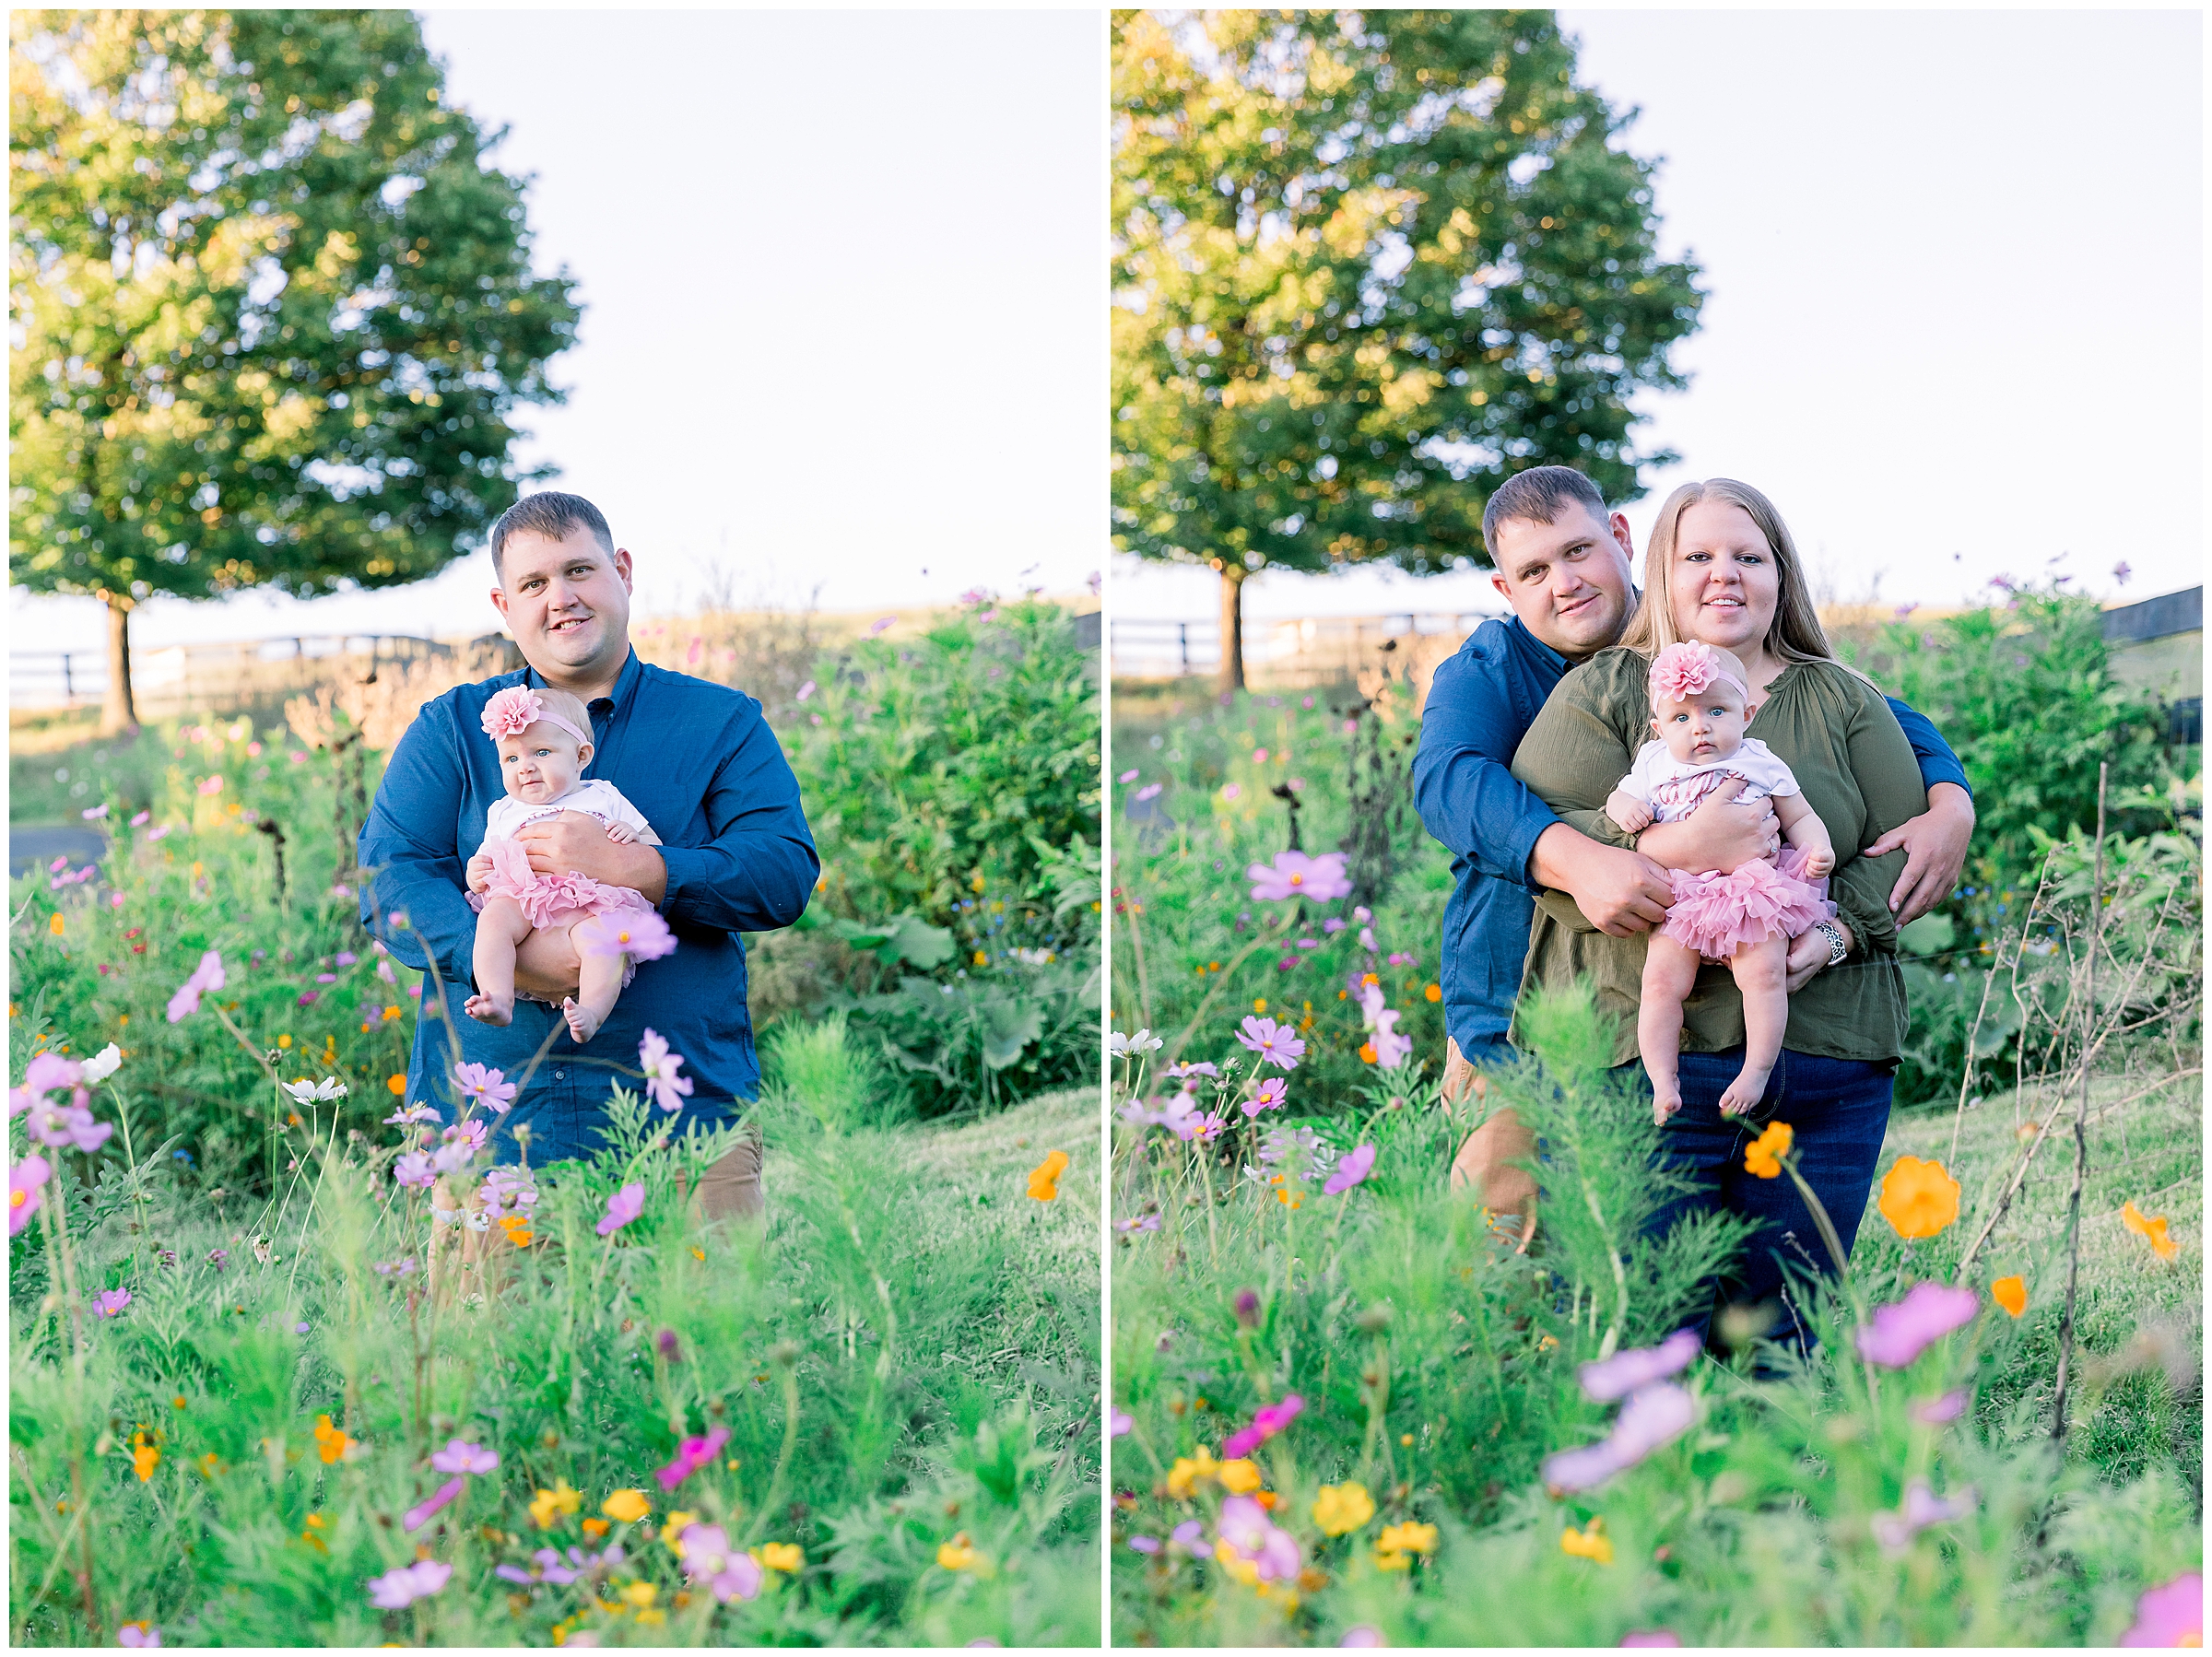 6 month session at Willow Spring Farm